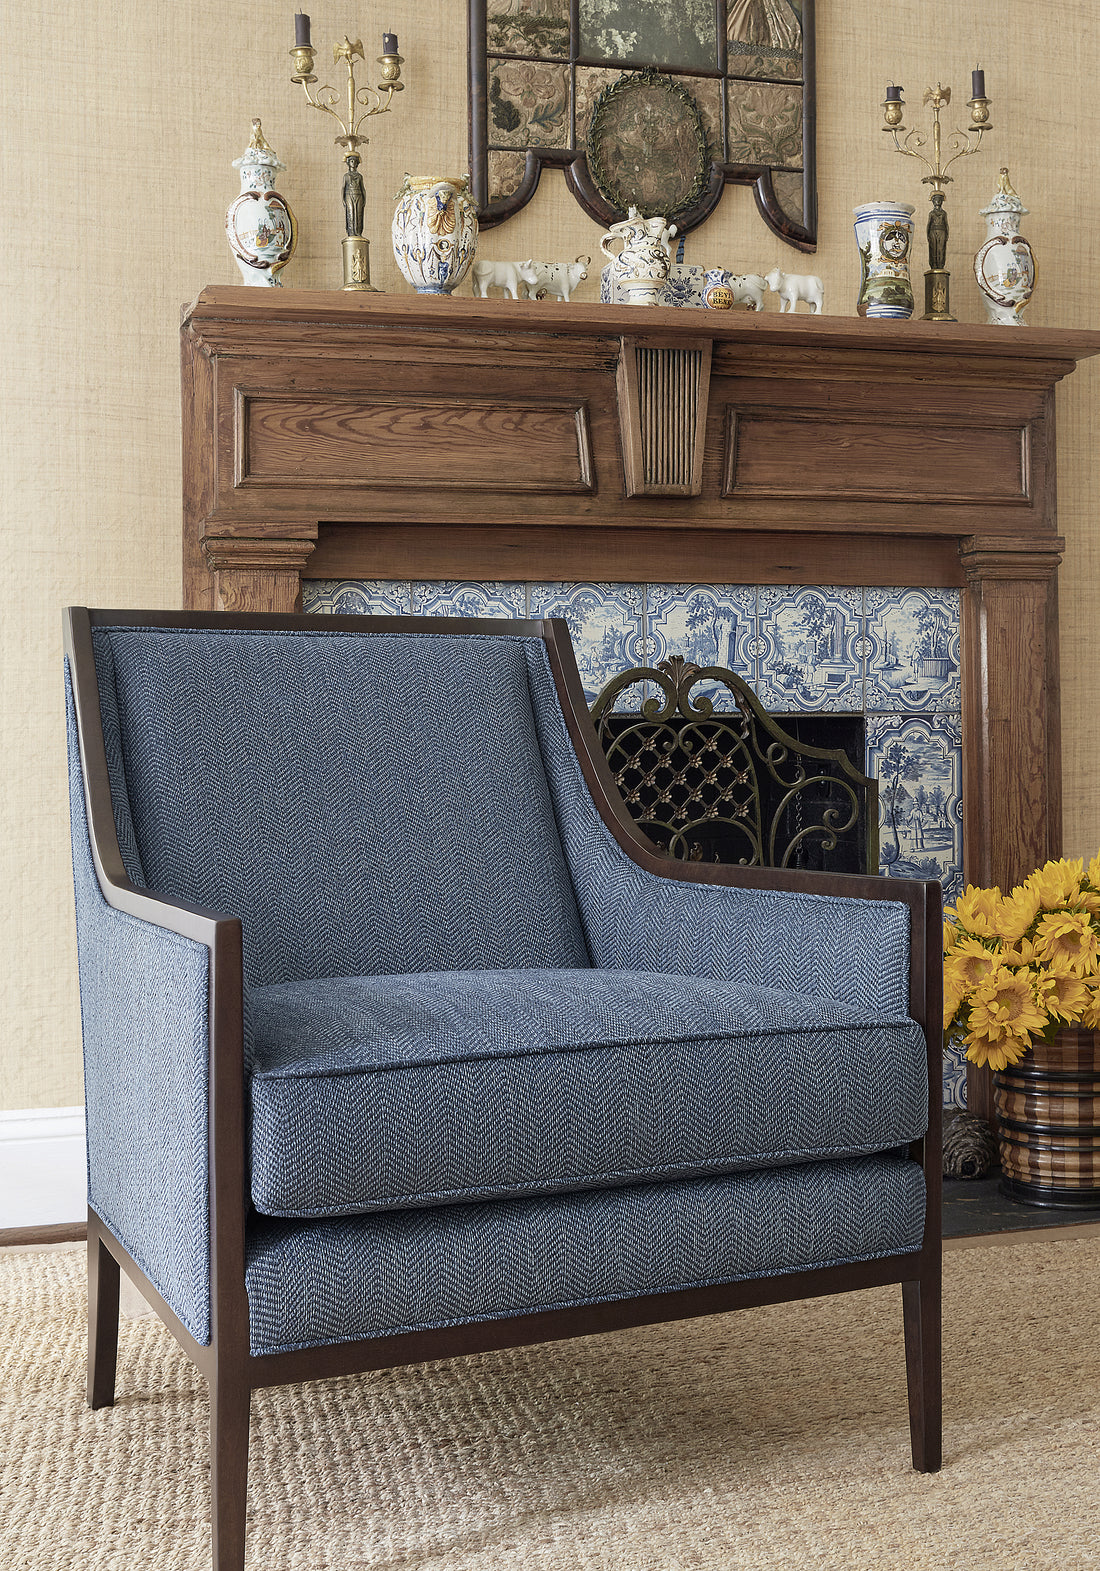 Pasadena Chair in Dalton Herringbone woven fabric in cadet color - pattern number W80626 by Thibaut in the Pinnacle collection